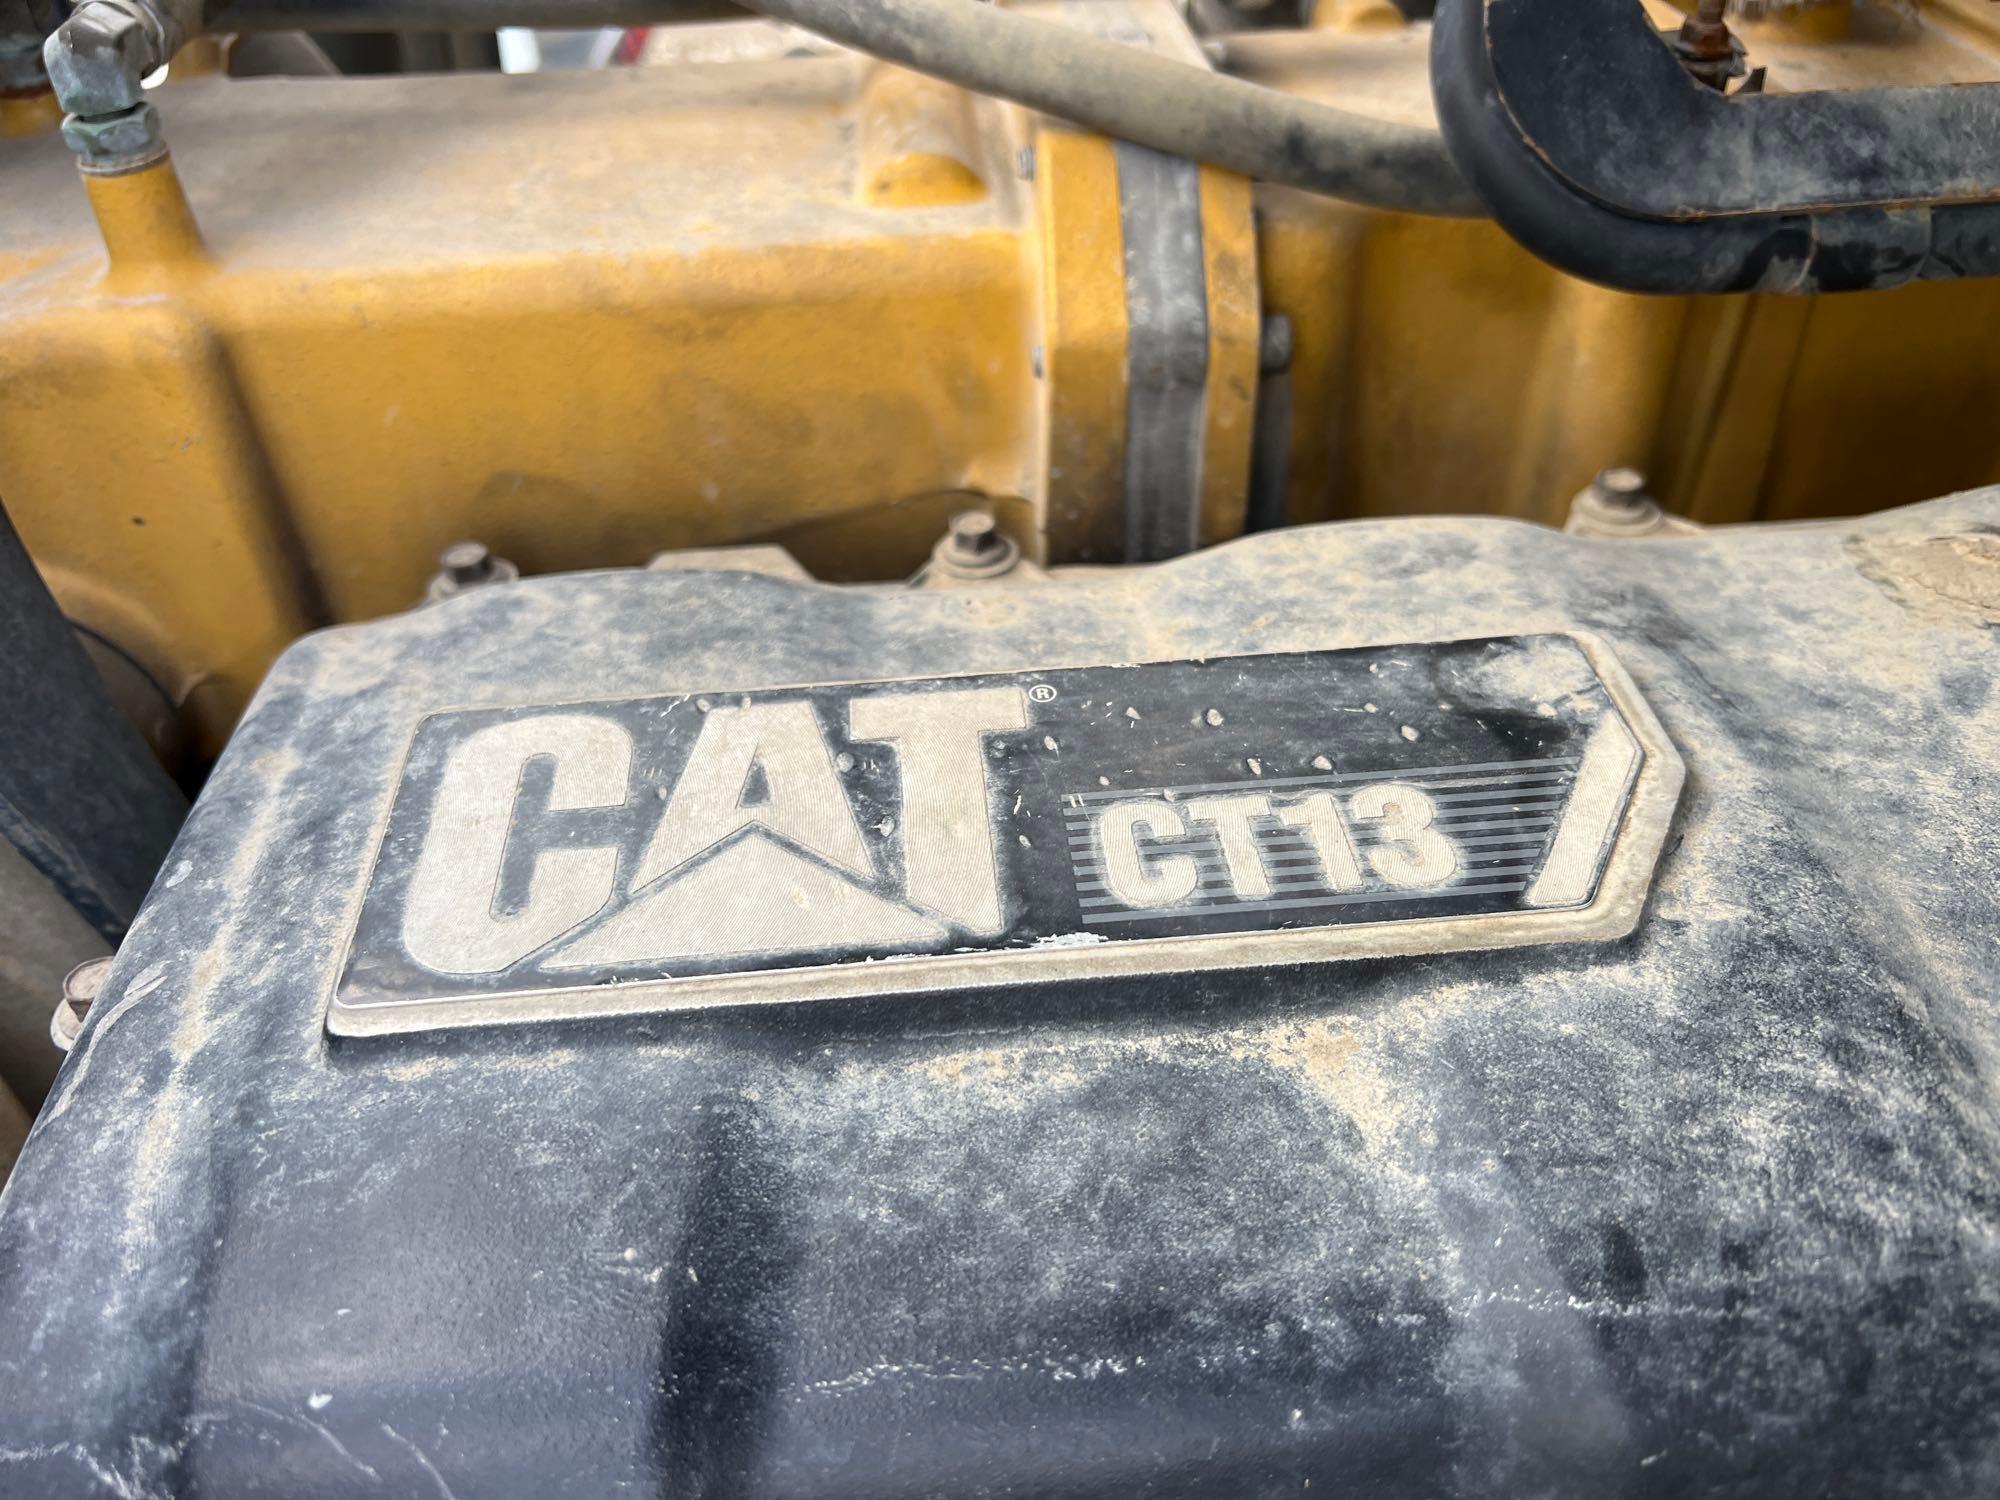 2014 CAT CT660S TRUCK TRACTOR VN:1HSJGTKR6EJ495293 powered by Cat C13 diesel engine, equipped with